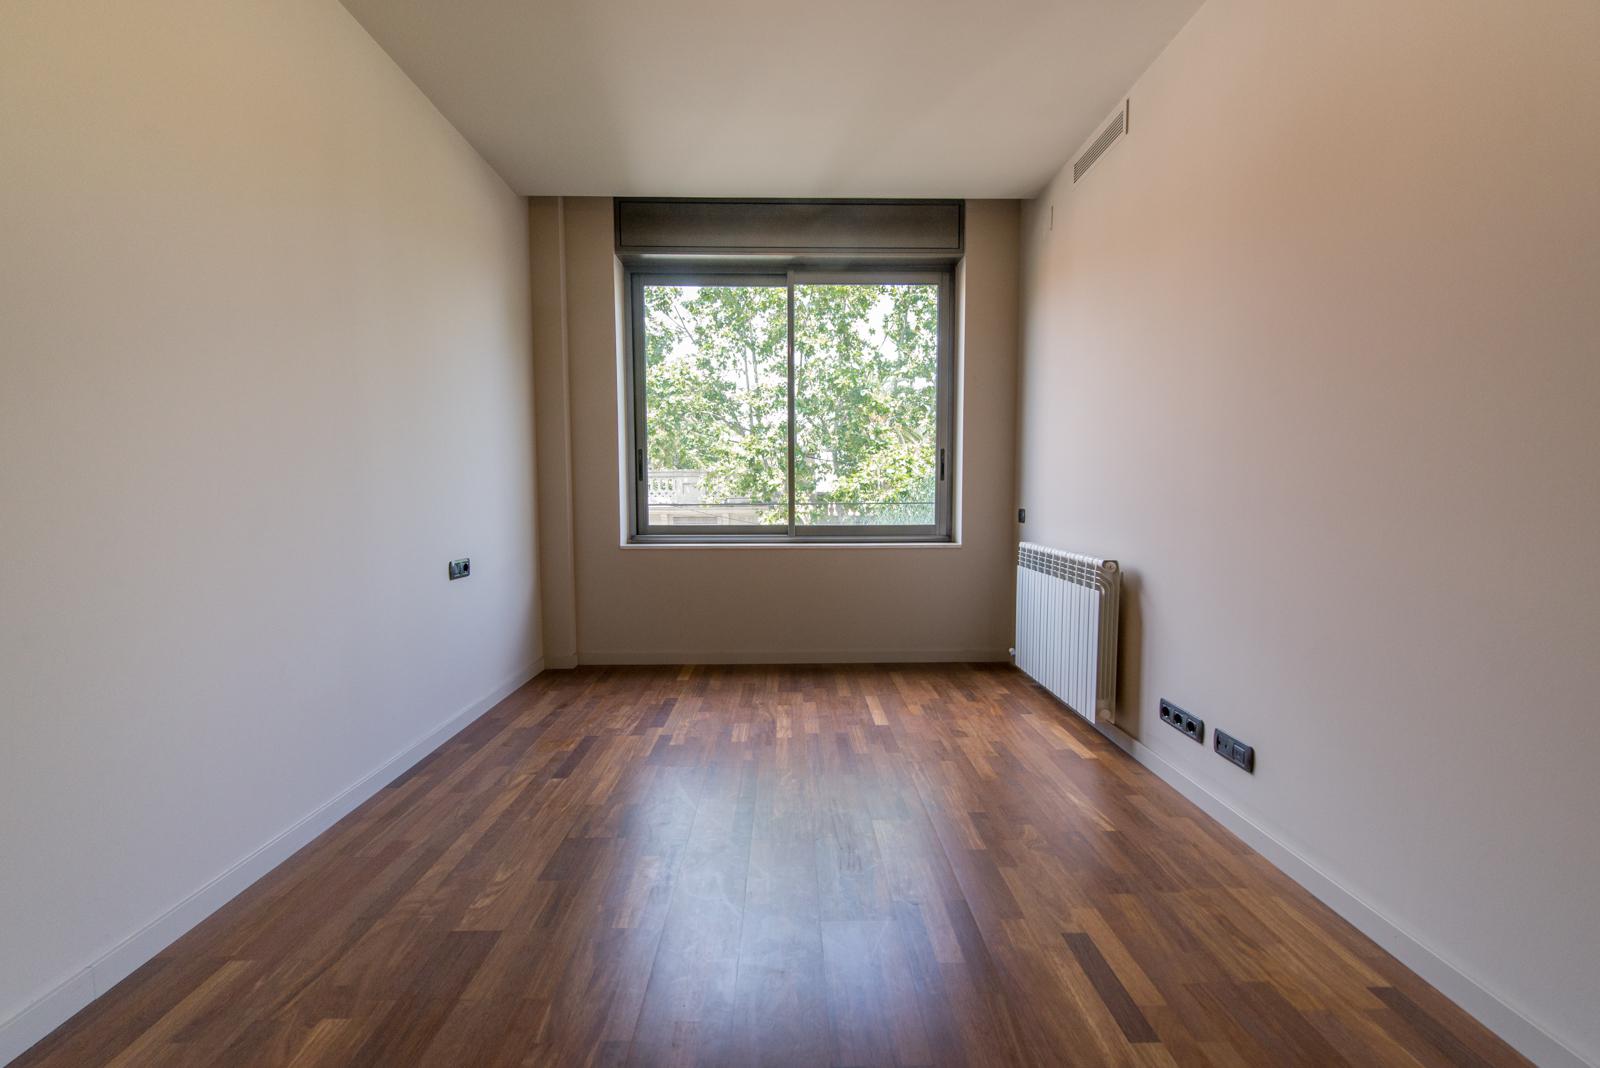 151215 Flat for sale in Gràcia, Vallcarca and les Penitents 9